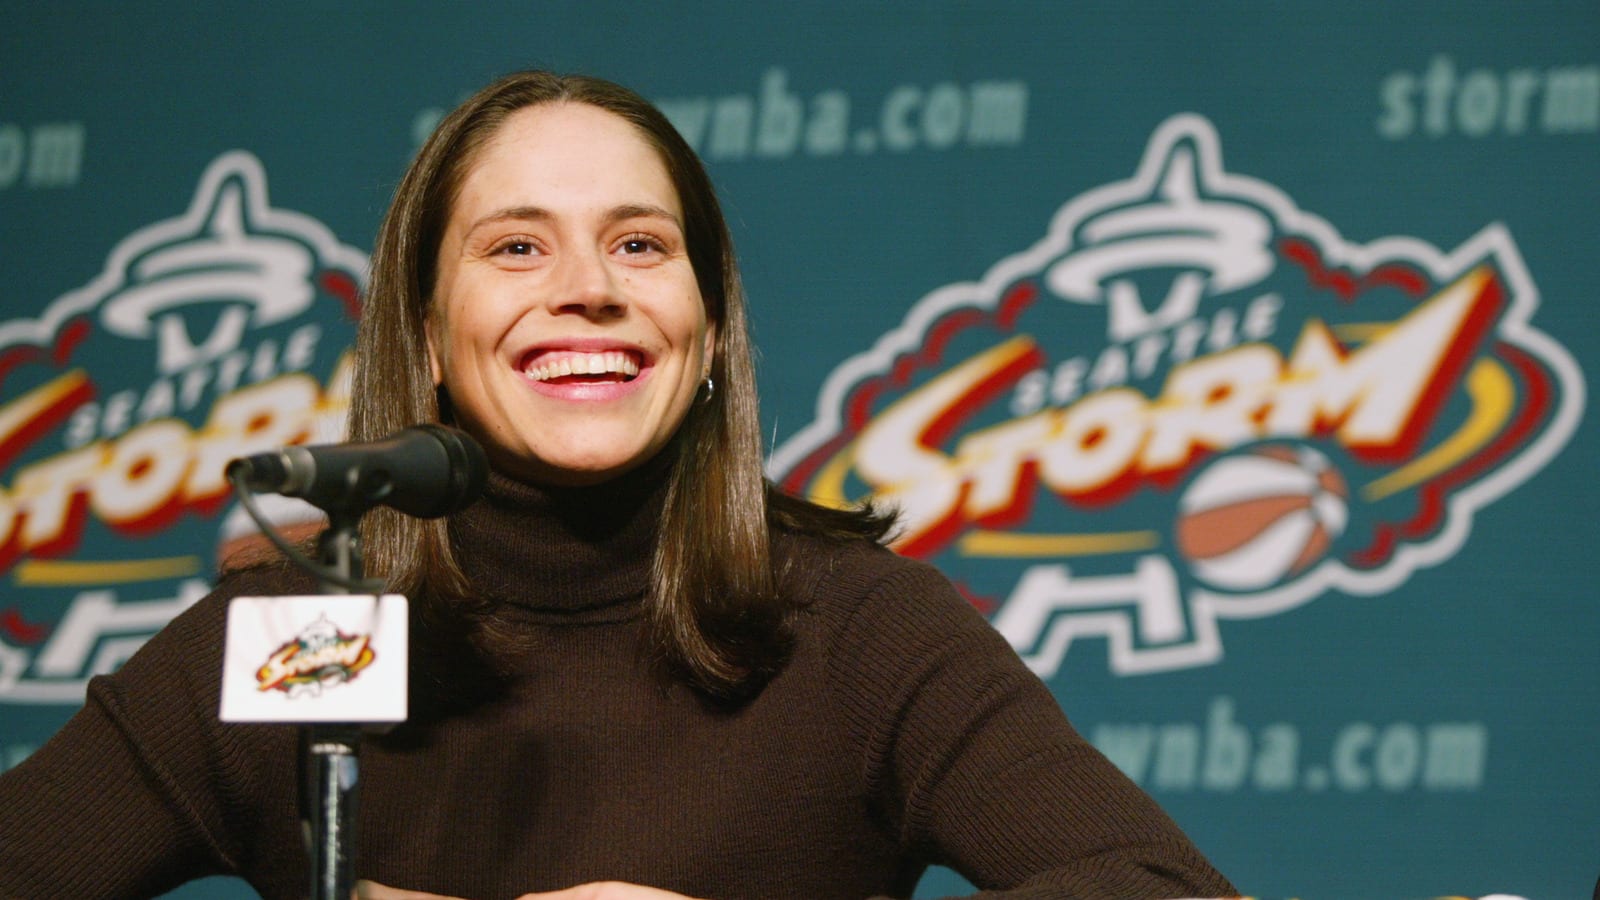 The 'First overall WNBA draft picks' quiz